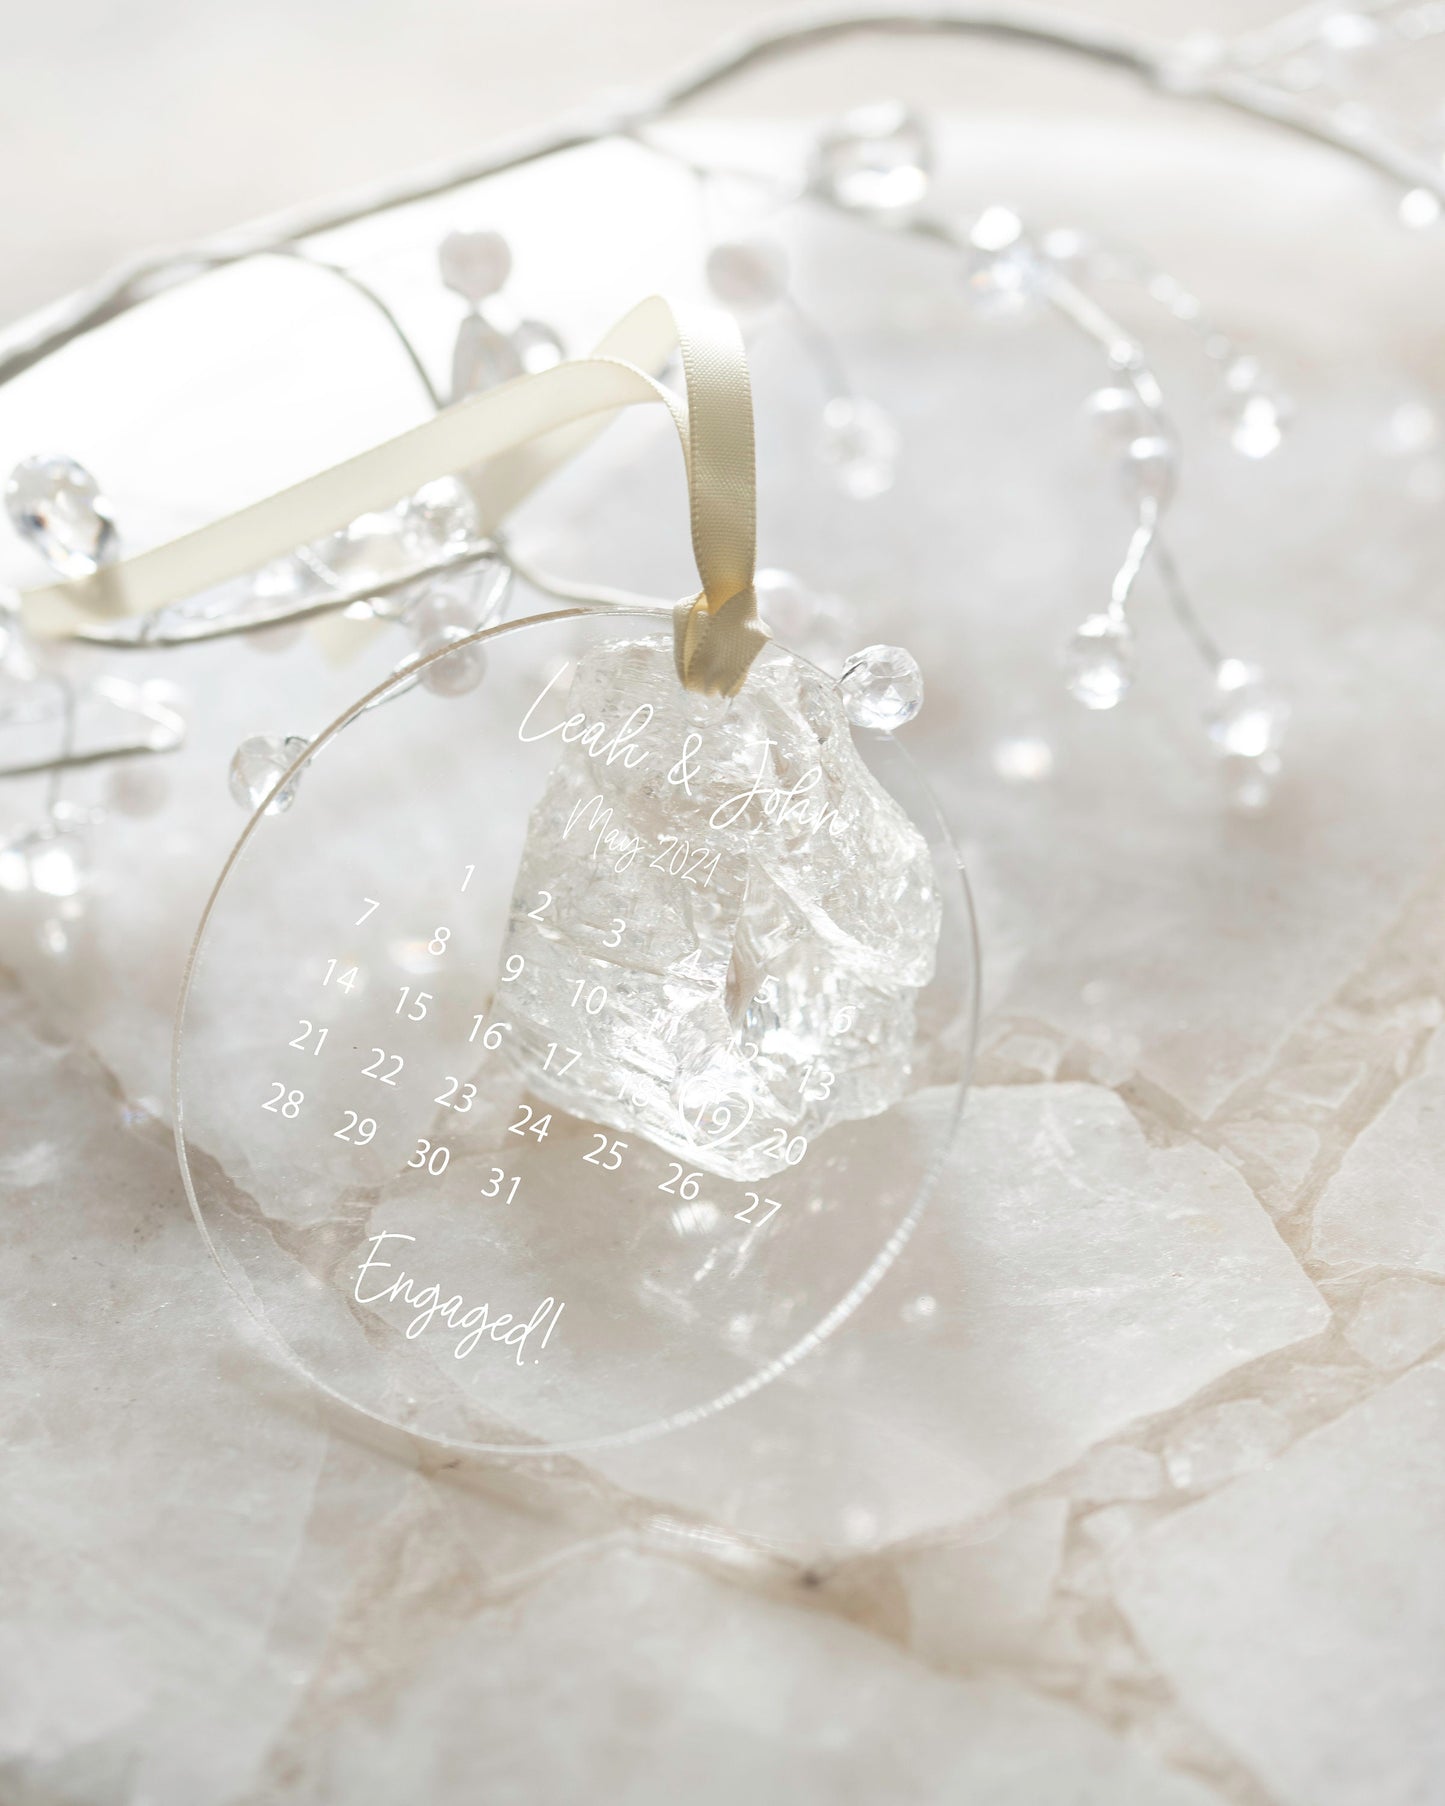 Personalized Engaged Ornament - Clear Acrylic - Our First Christmas - Gift for the Couple - Engagement Gift - AO09